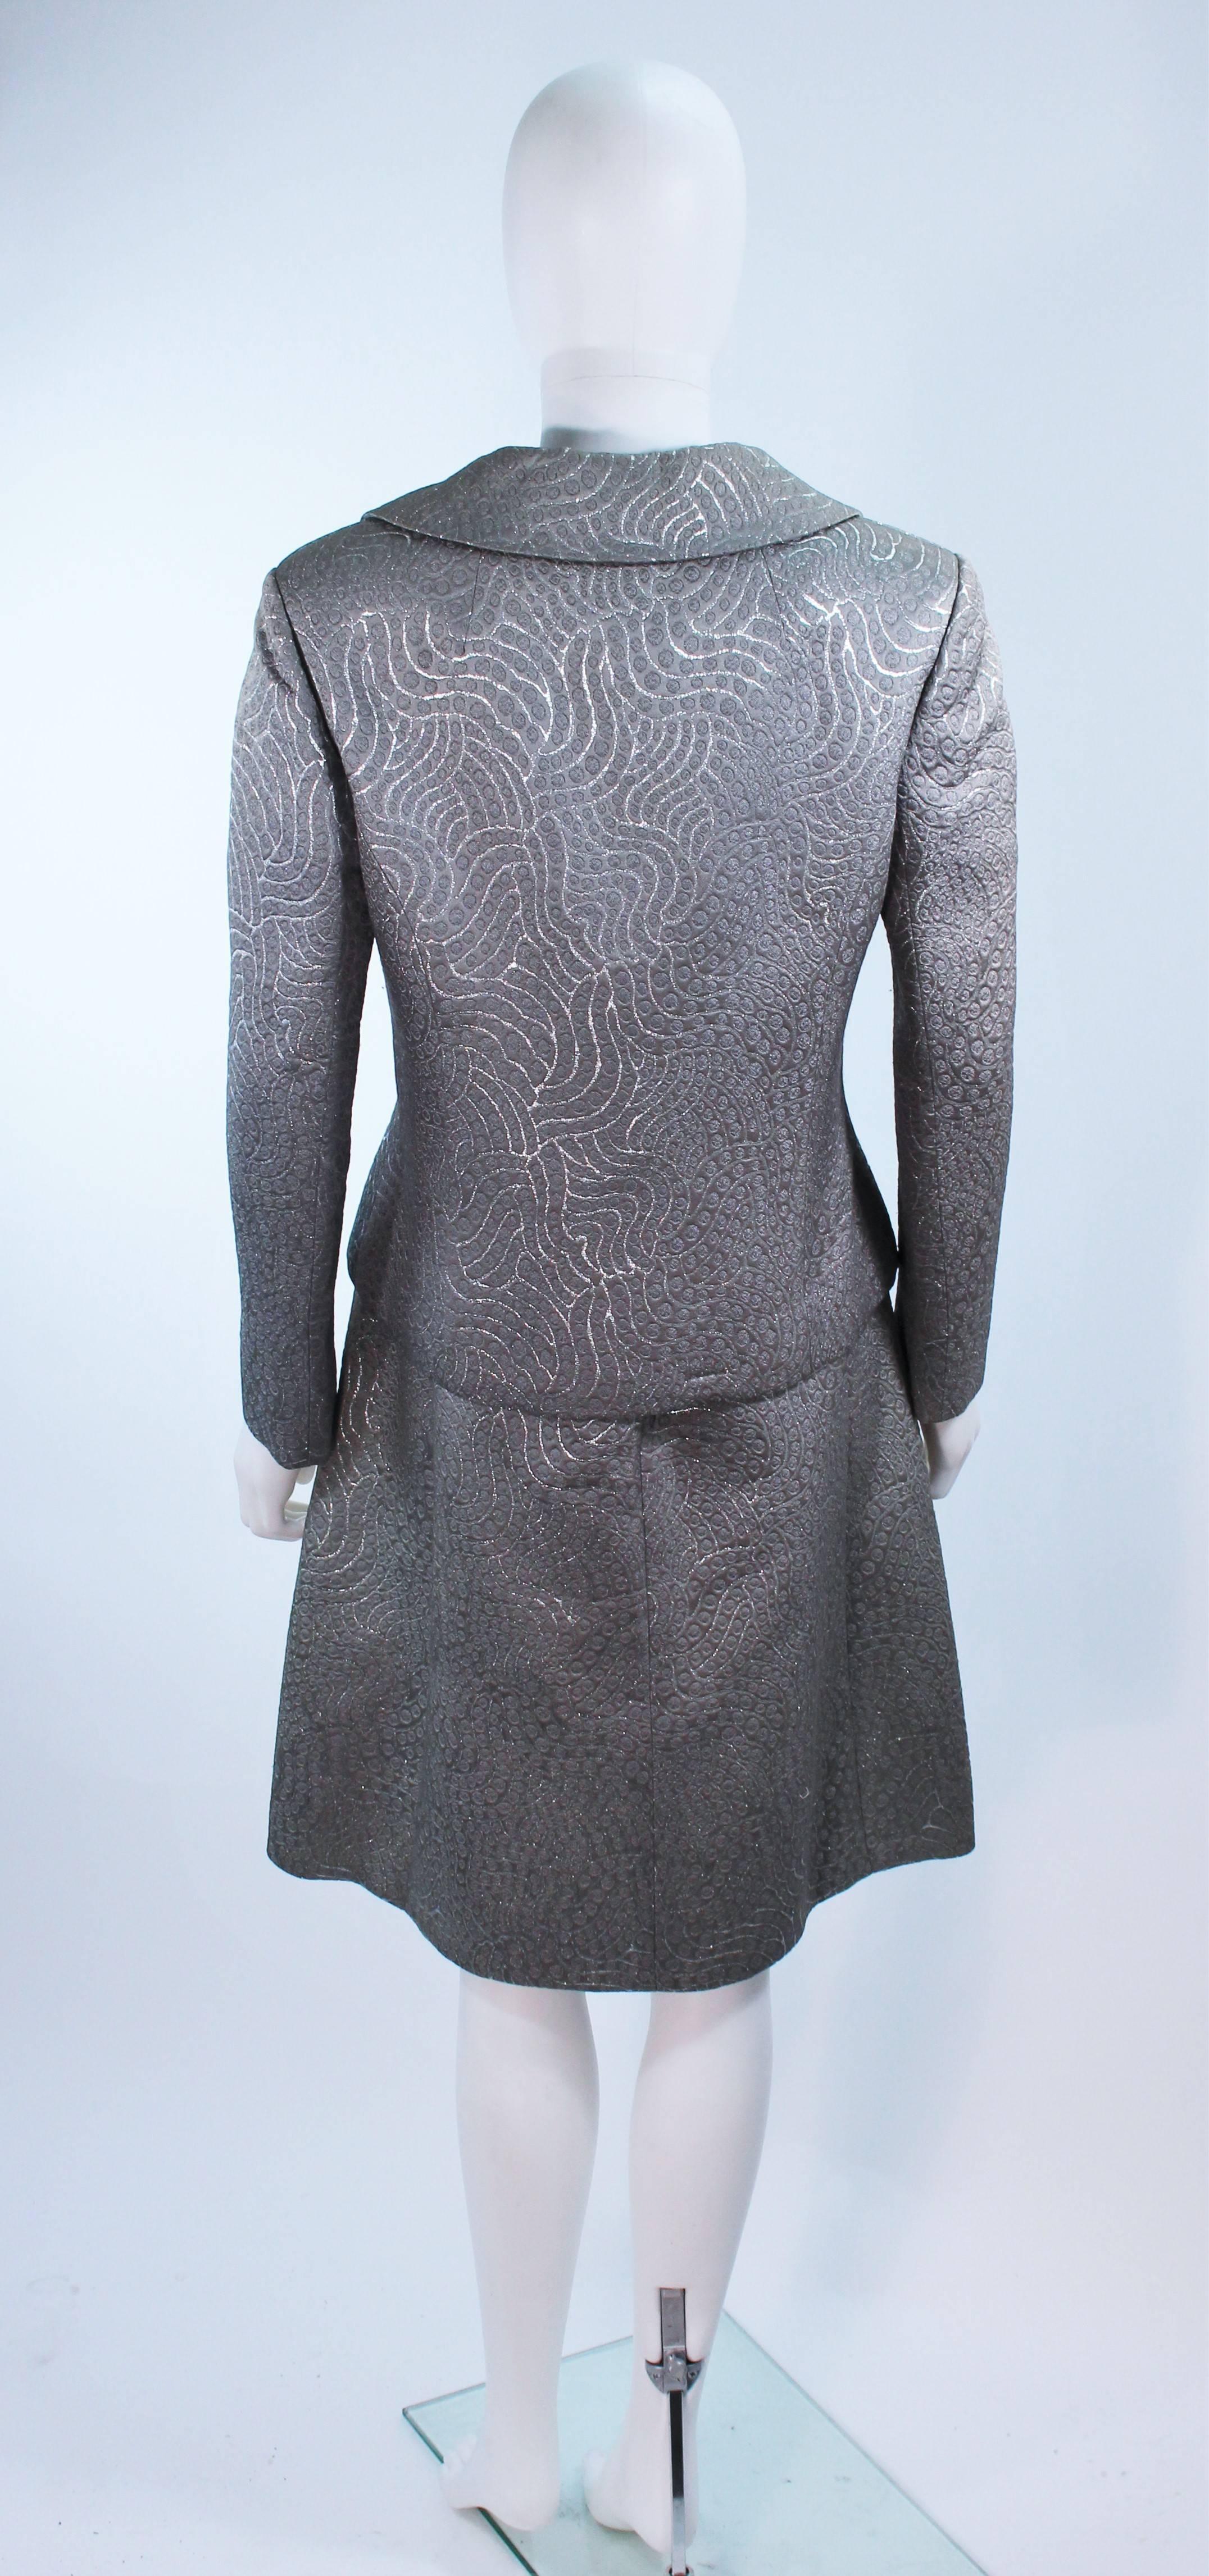 Silver Metallic 1960's Brocade Dress and Coat Ensemble Size 10 In Excellent Condition For Sale In Los Angeles, CA